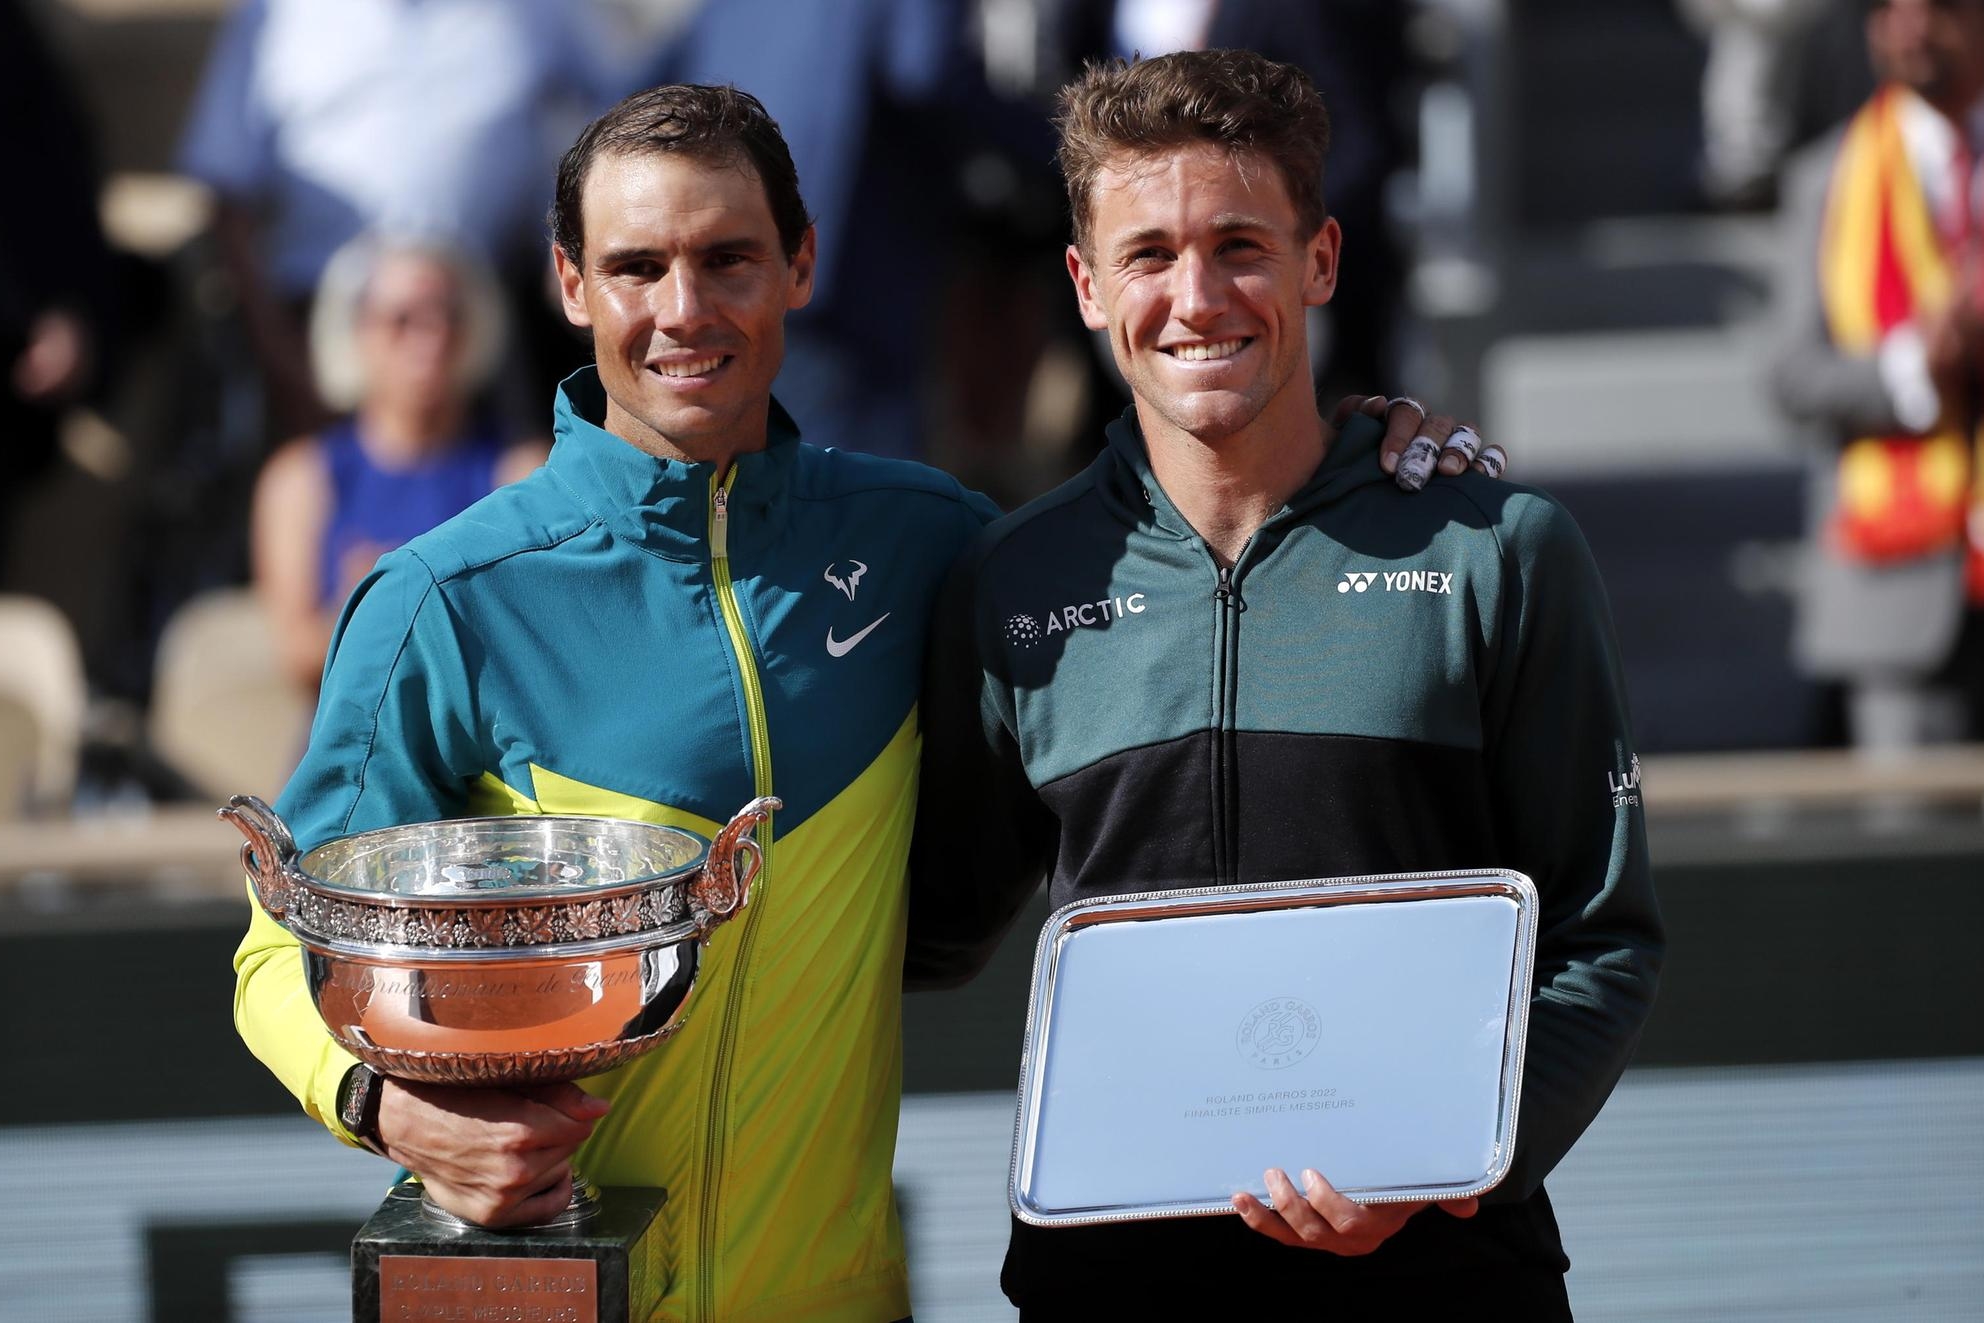 epa09997682 Winner Rafael Nadal of Spain (L) and runner-up Casper Ruud of Norway pose with their trophies after their Men’s Singles final match during the French Open tennis tournament at Roland ?Garros in Paris, France, 05 June 2022. EPA/CHRISTOPHE PETIT TESSON